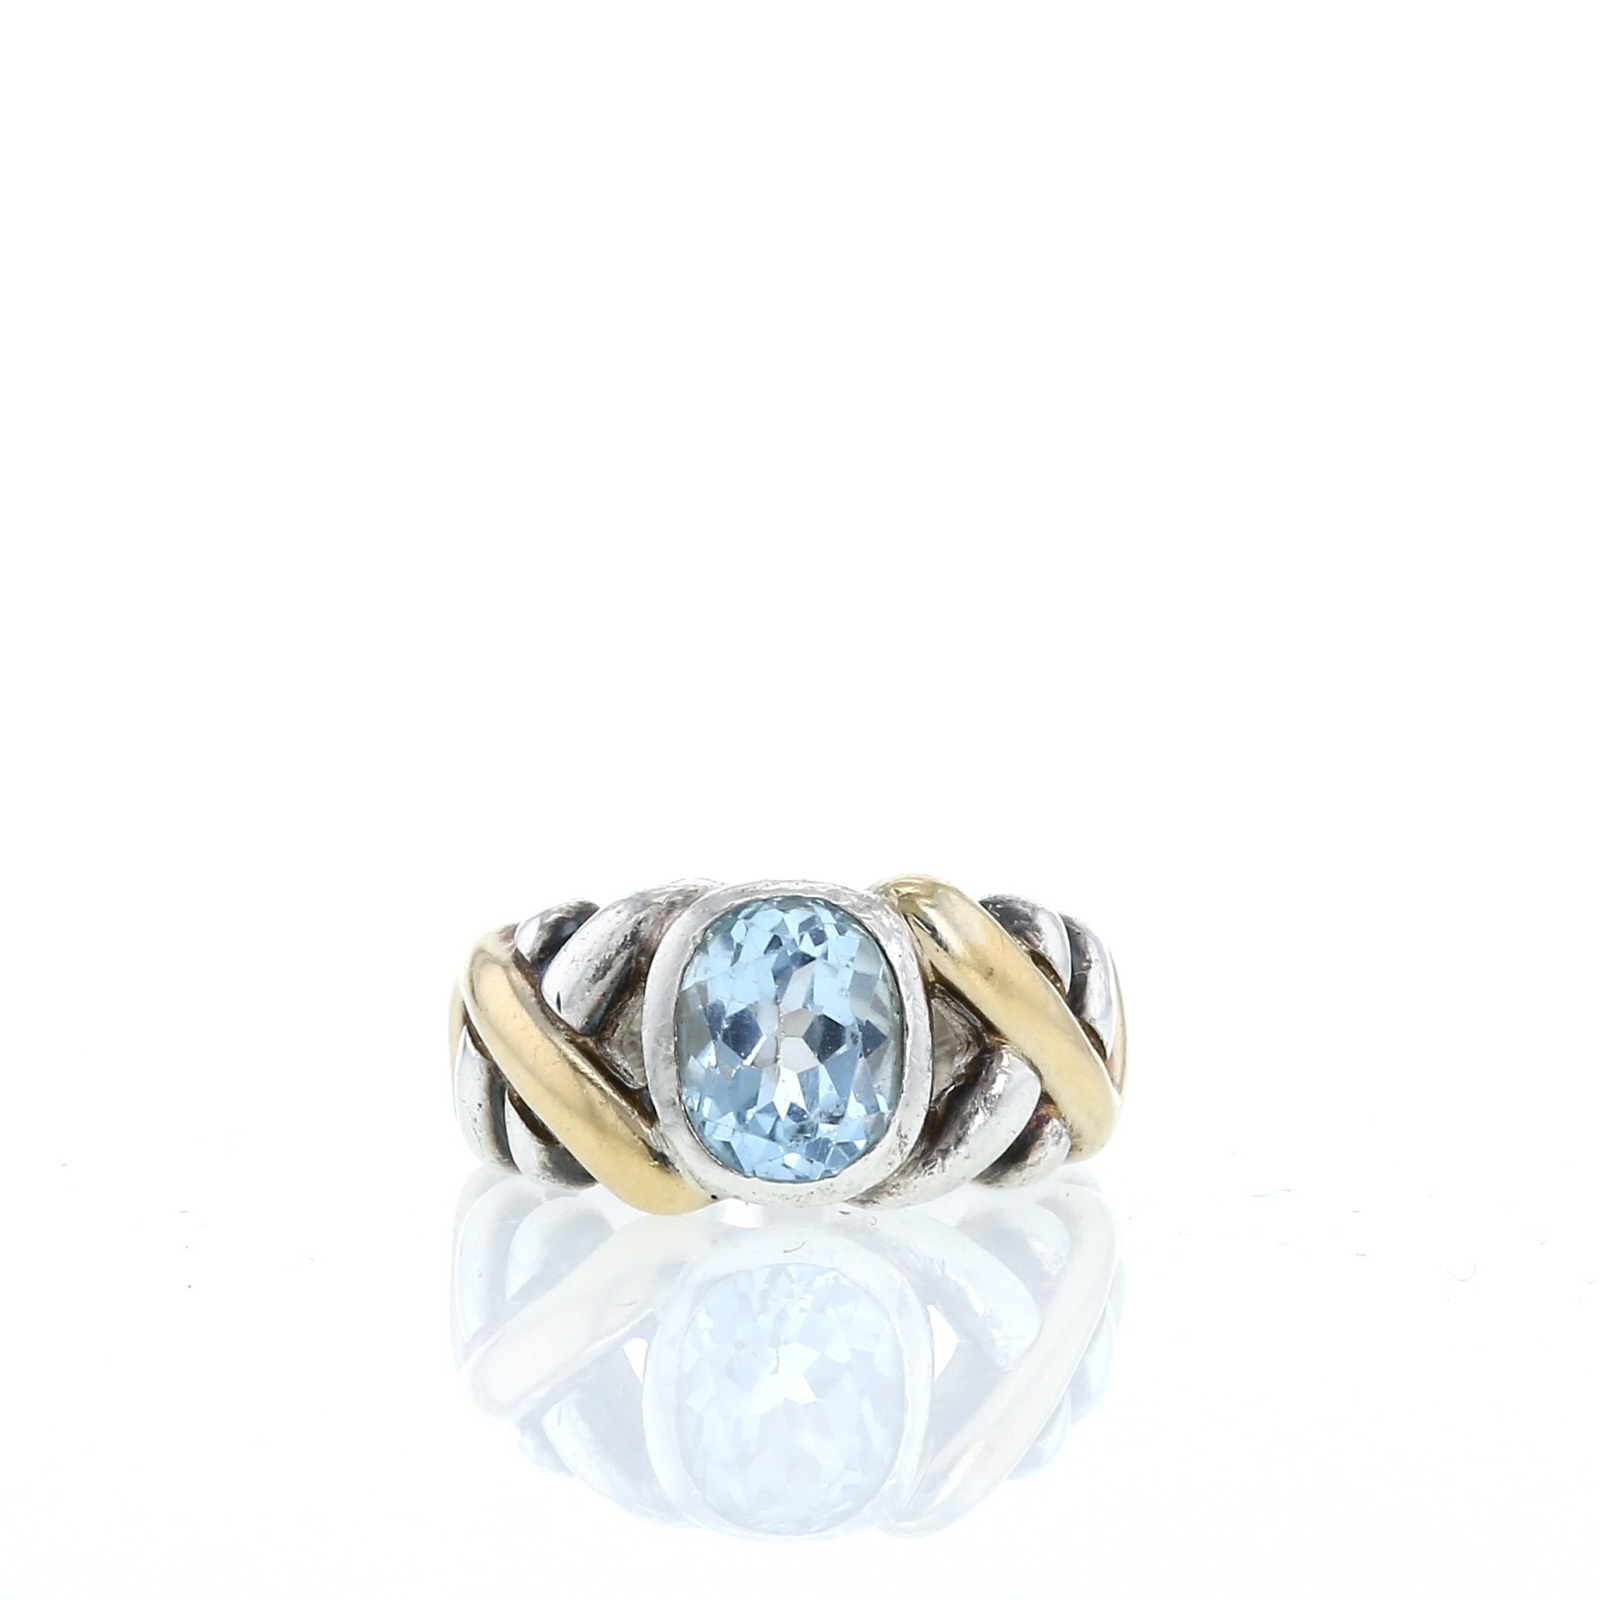 Ring In Silver, Yellow Gold And Topaz